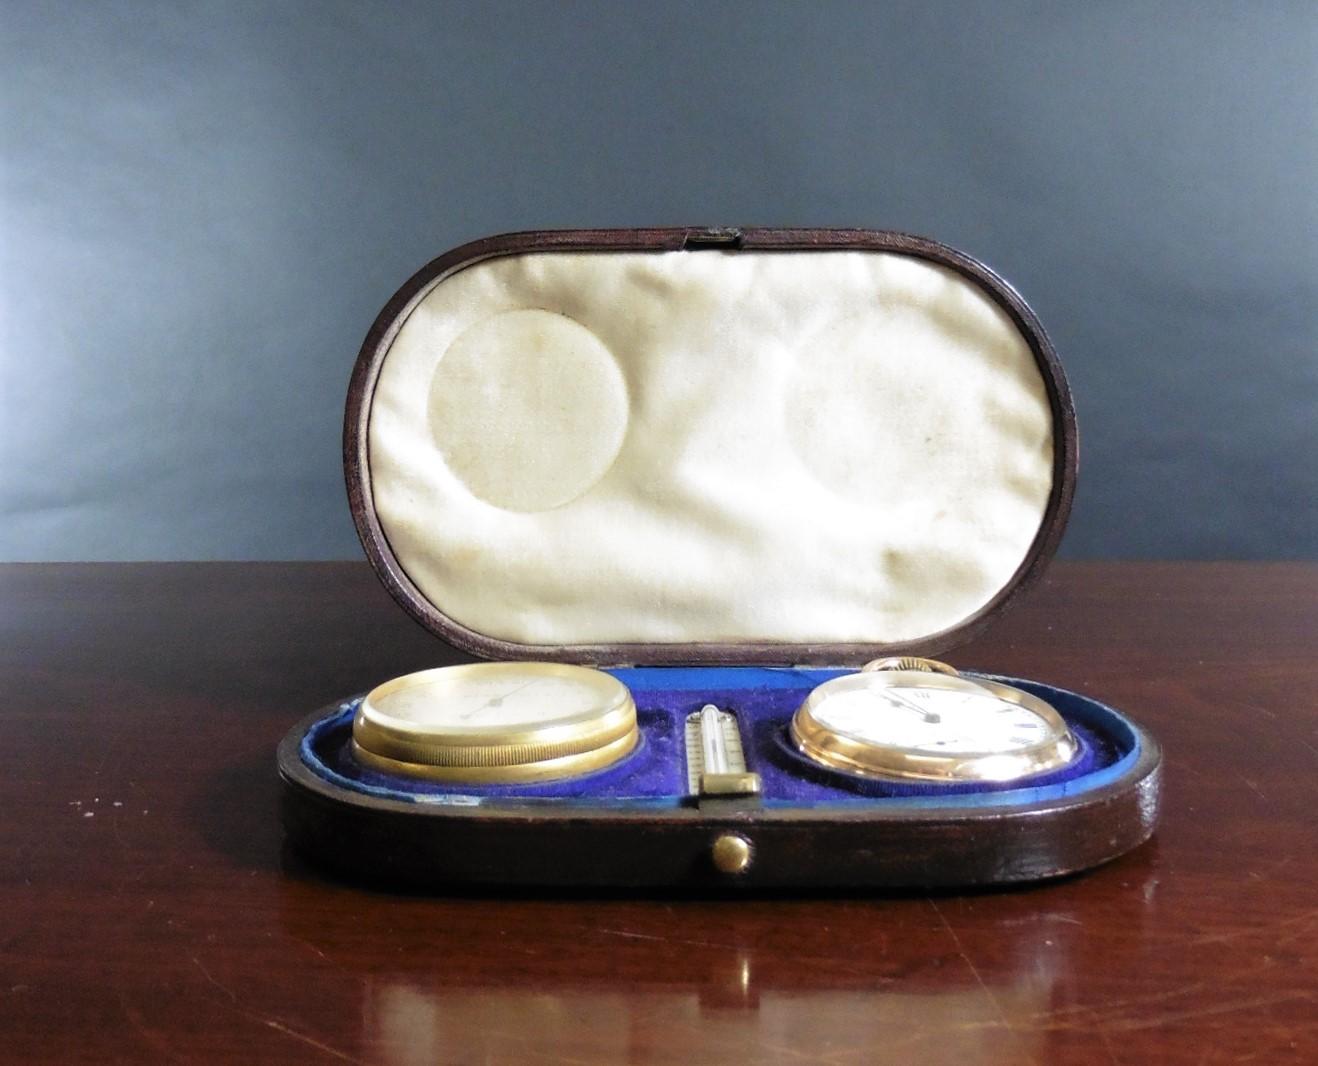 Victorian Pocket Watch, barometer and thermometer compendium set.

Housed in the original brown leather presentation case with hinged lid and blue velvet interior.

Inside the case rests a brass cased pocket watch surmounted by a crown winder